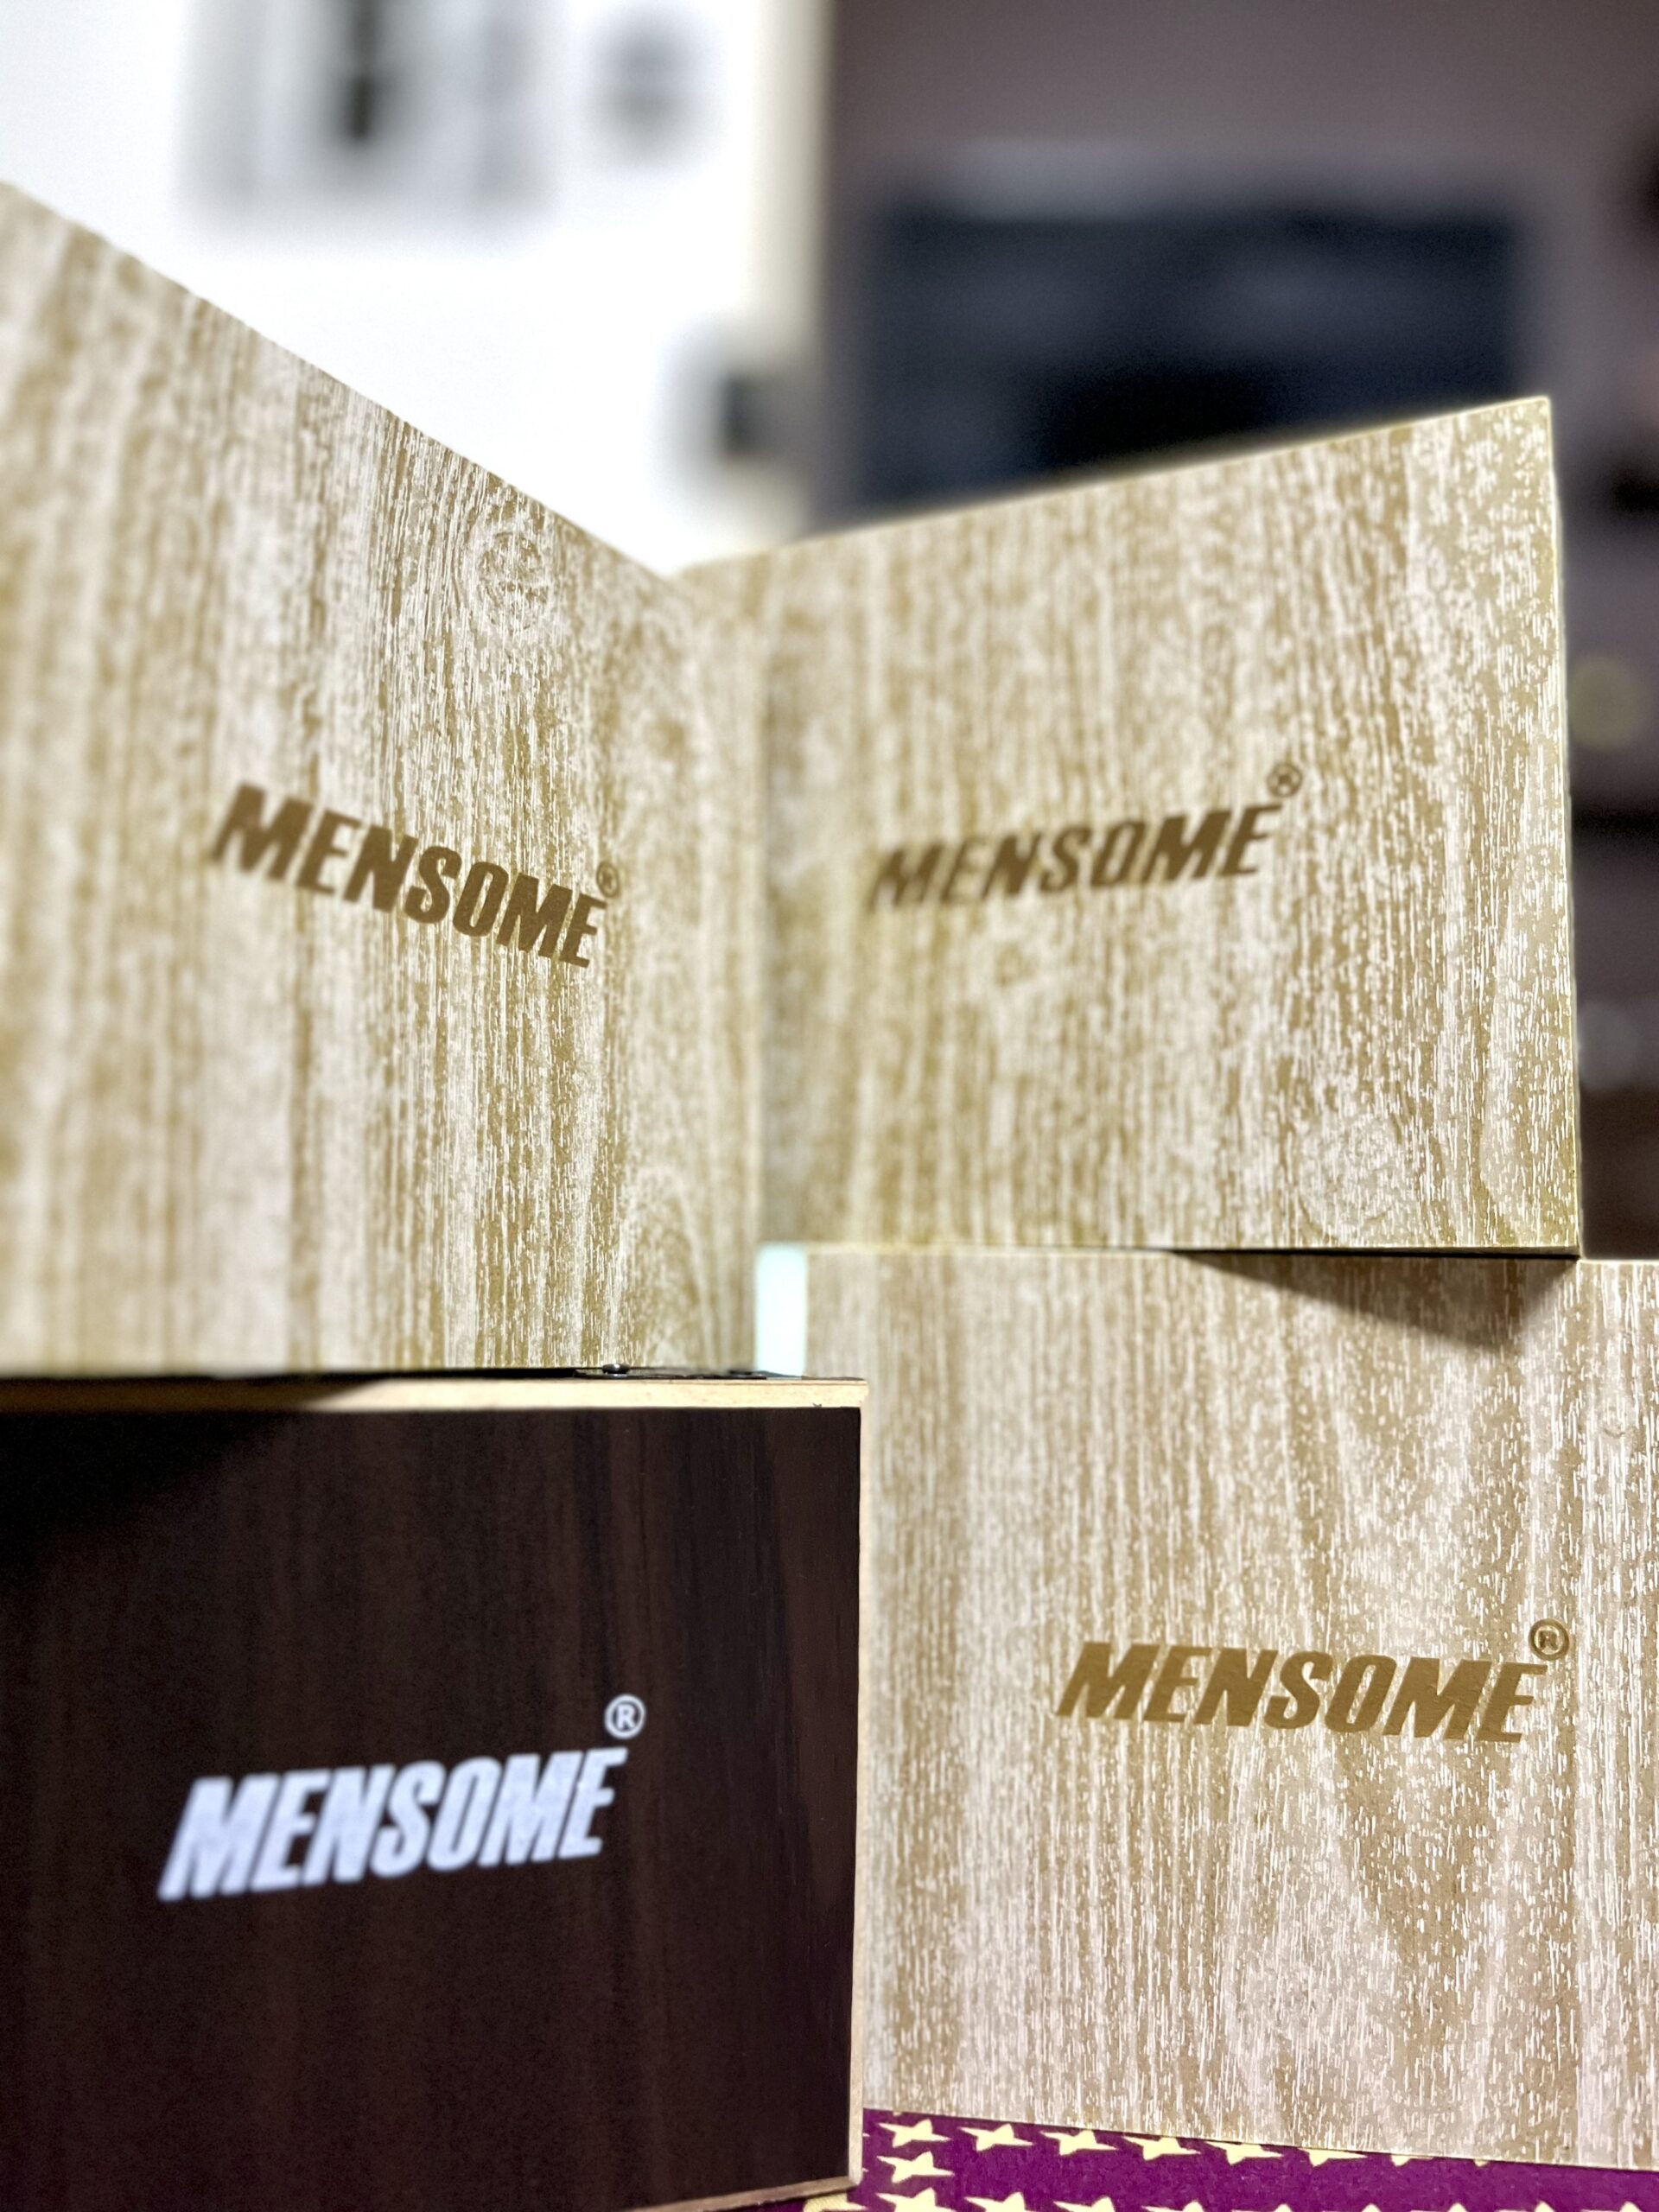 mensome packaging